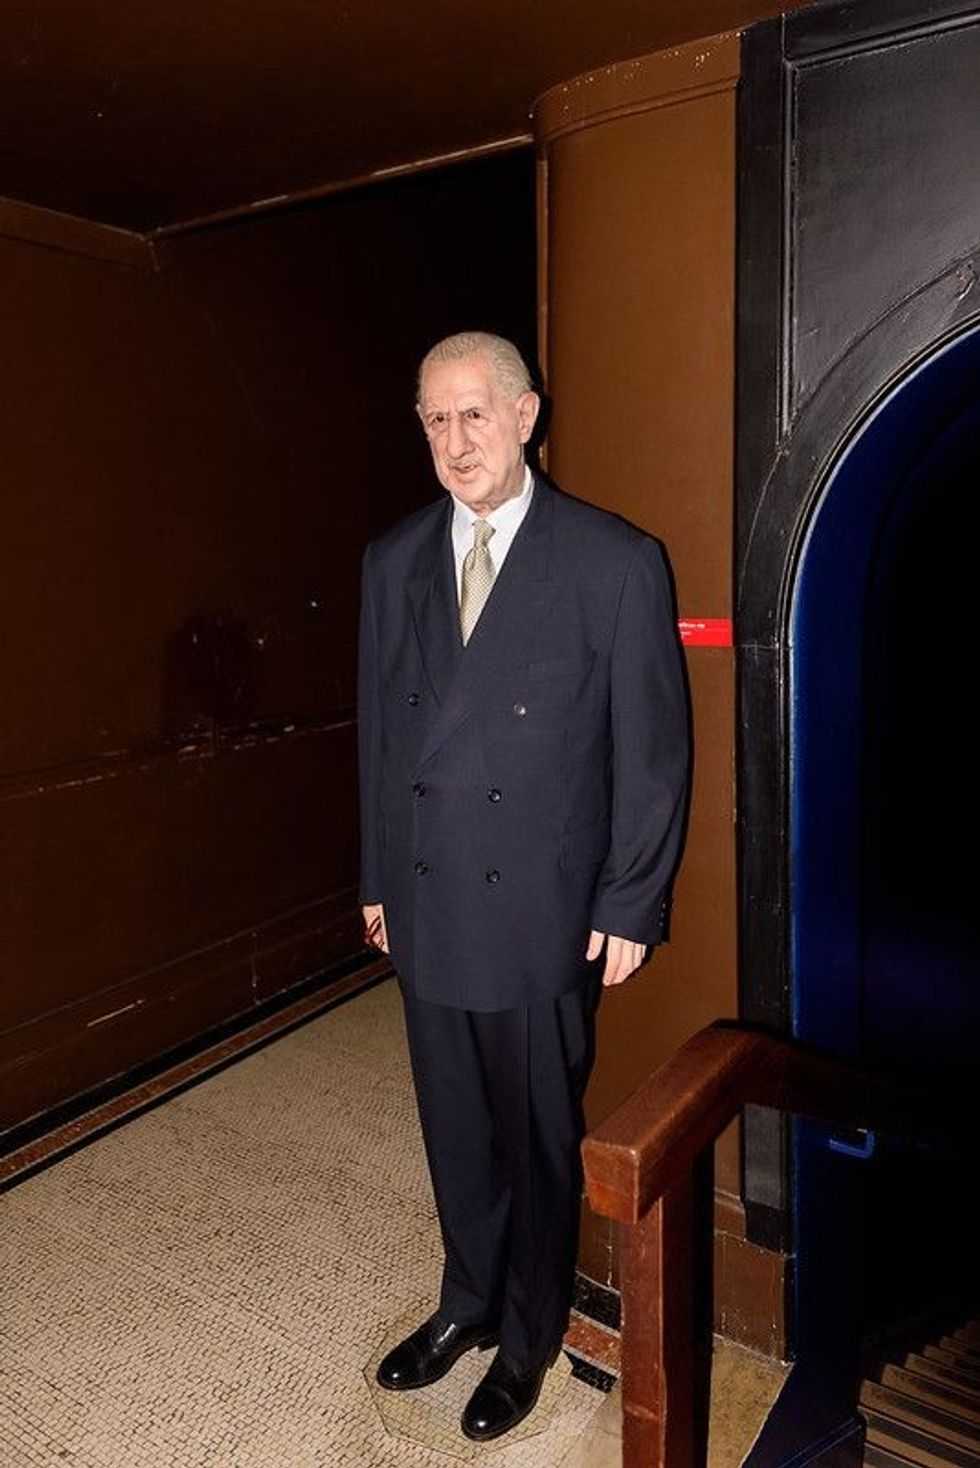 Charles de Gaulle, French general and statesman, the Wax Museum Grevin in Paris, France